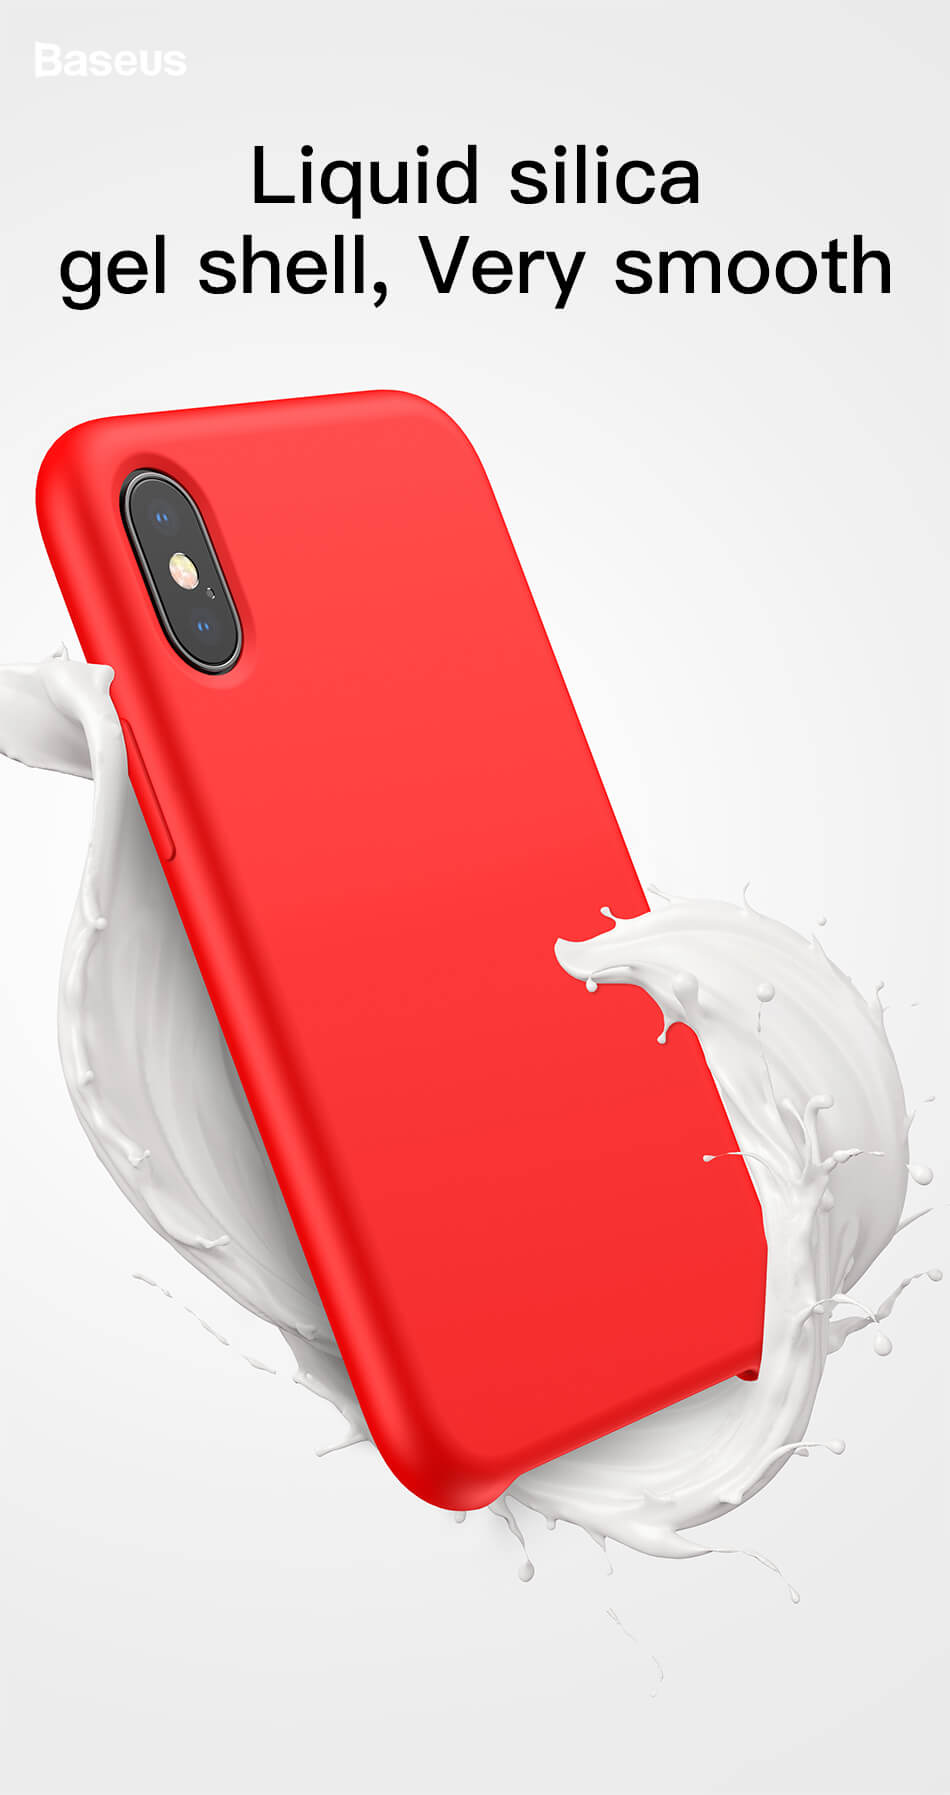 op-lung-silicon-baseus-original-lsr-case-danh-cho-iphone-xs-max